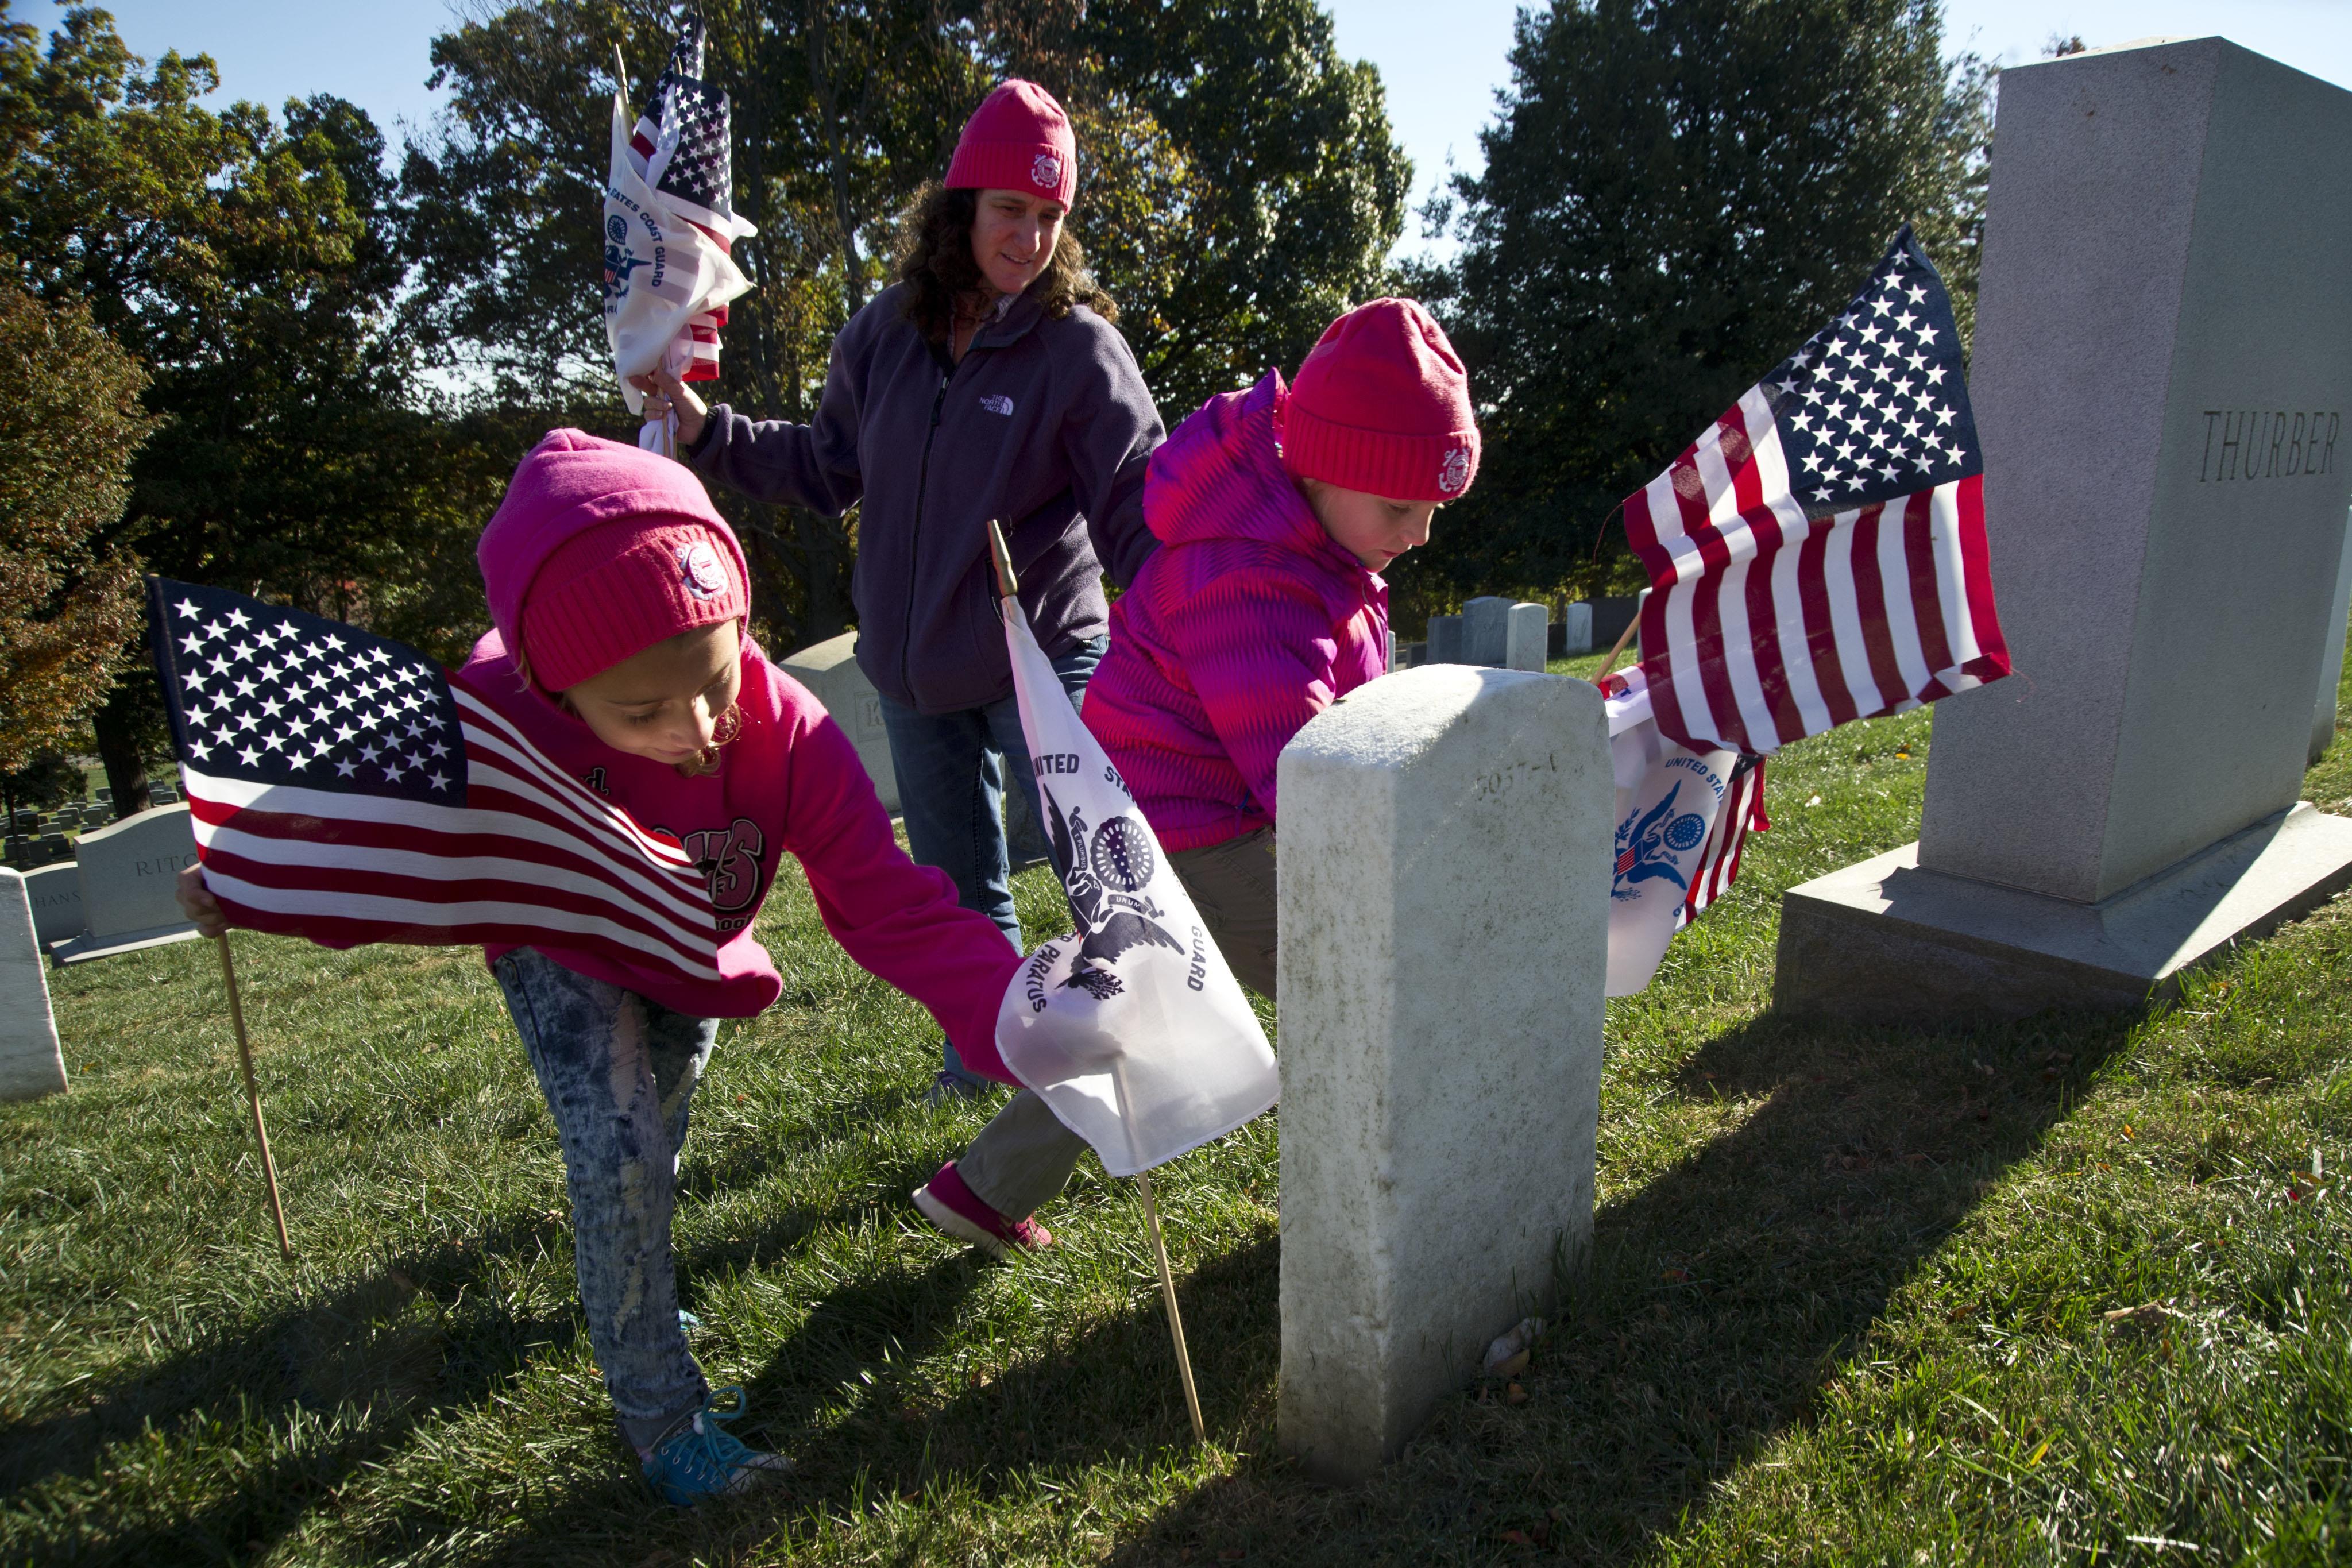 Coast Guard member Melissa Ransom and her daughters partitipate in the annual Flags Across America event at Arlington National Cemetery.